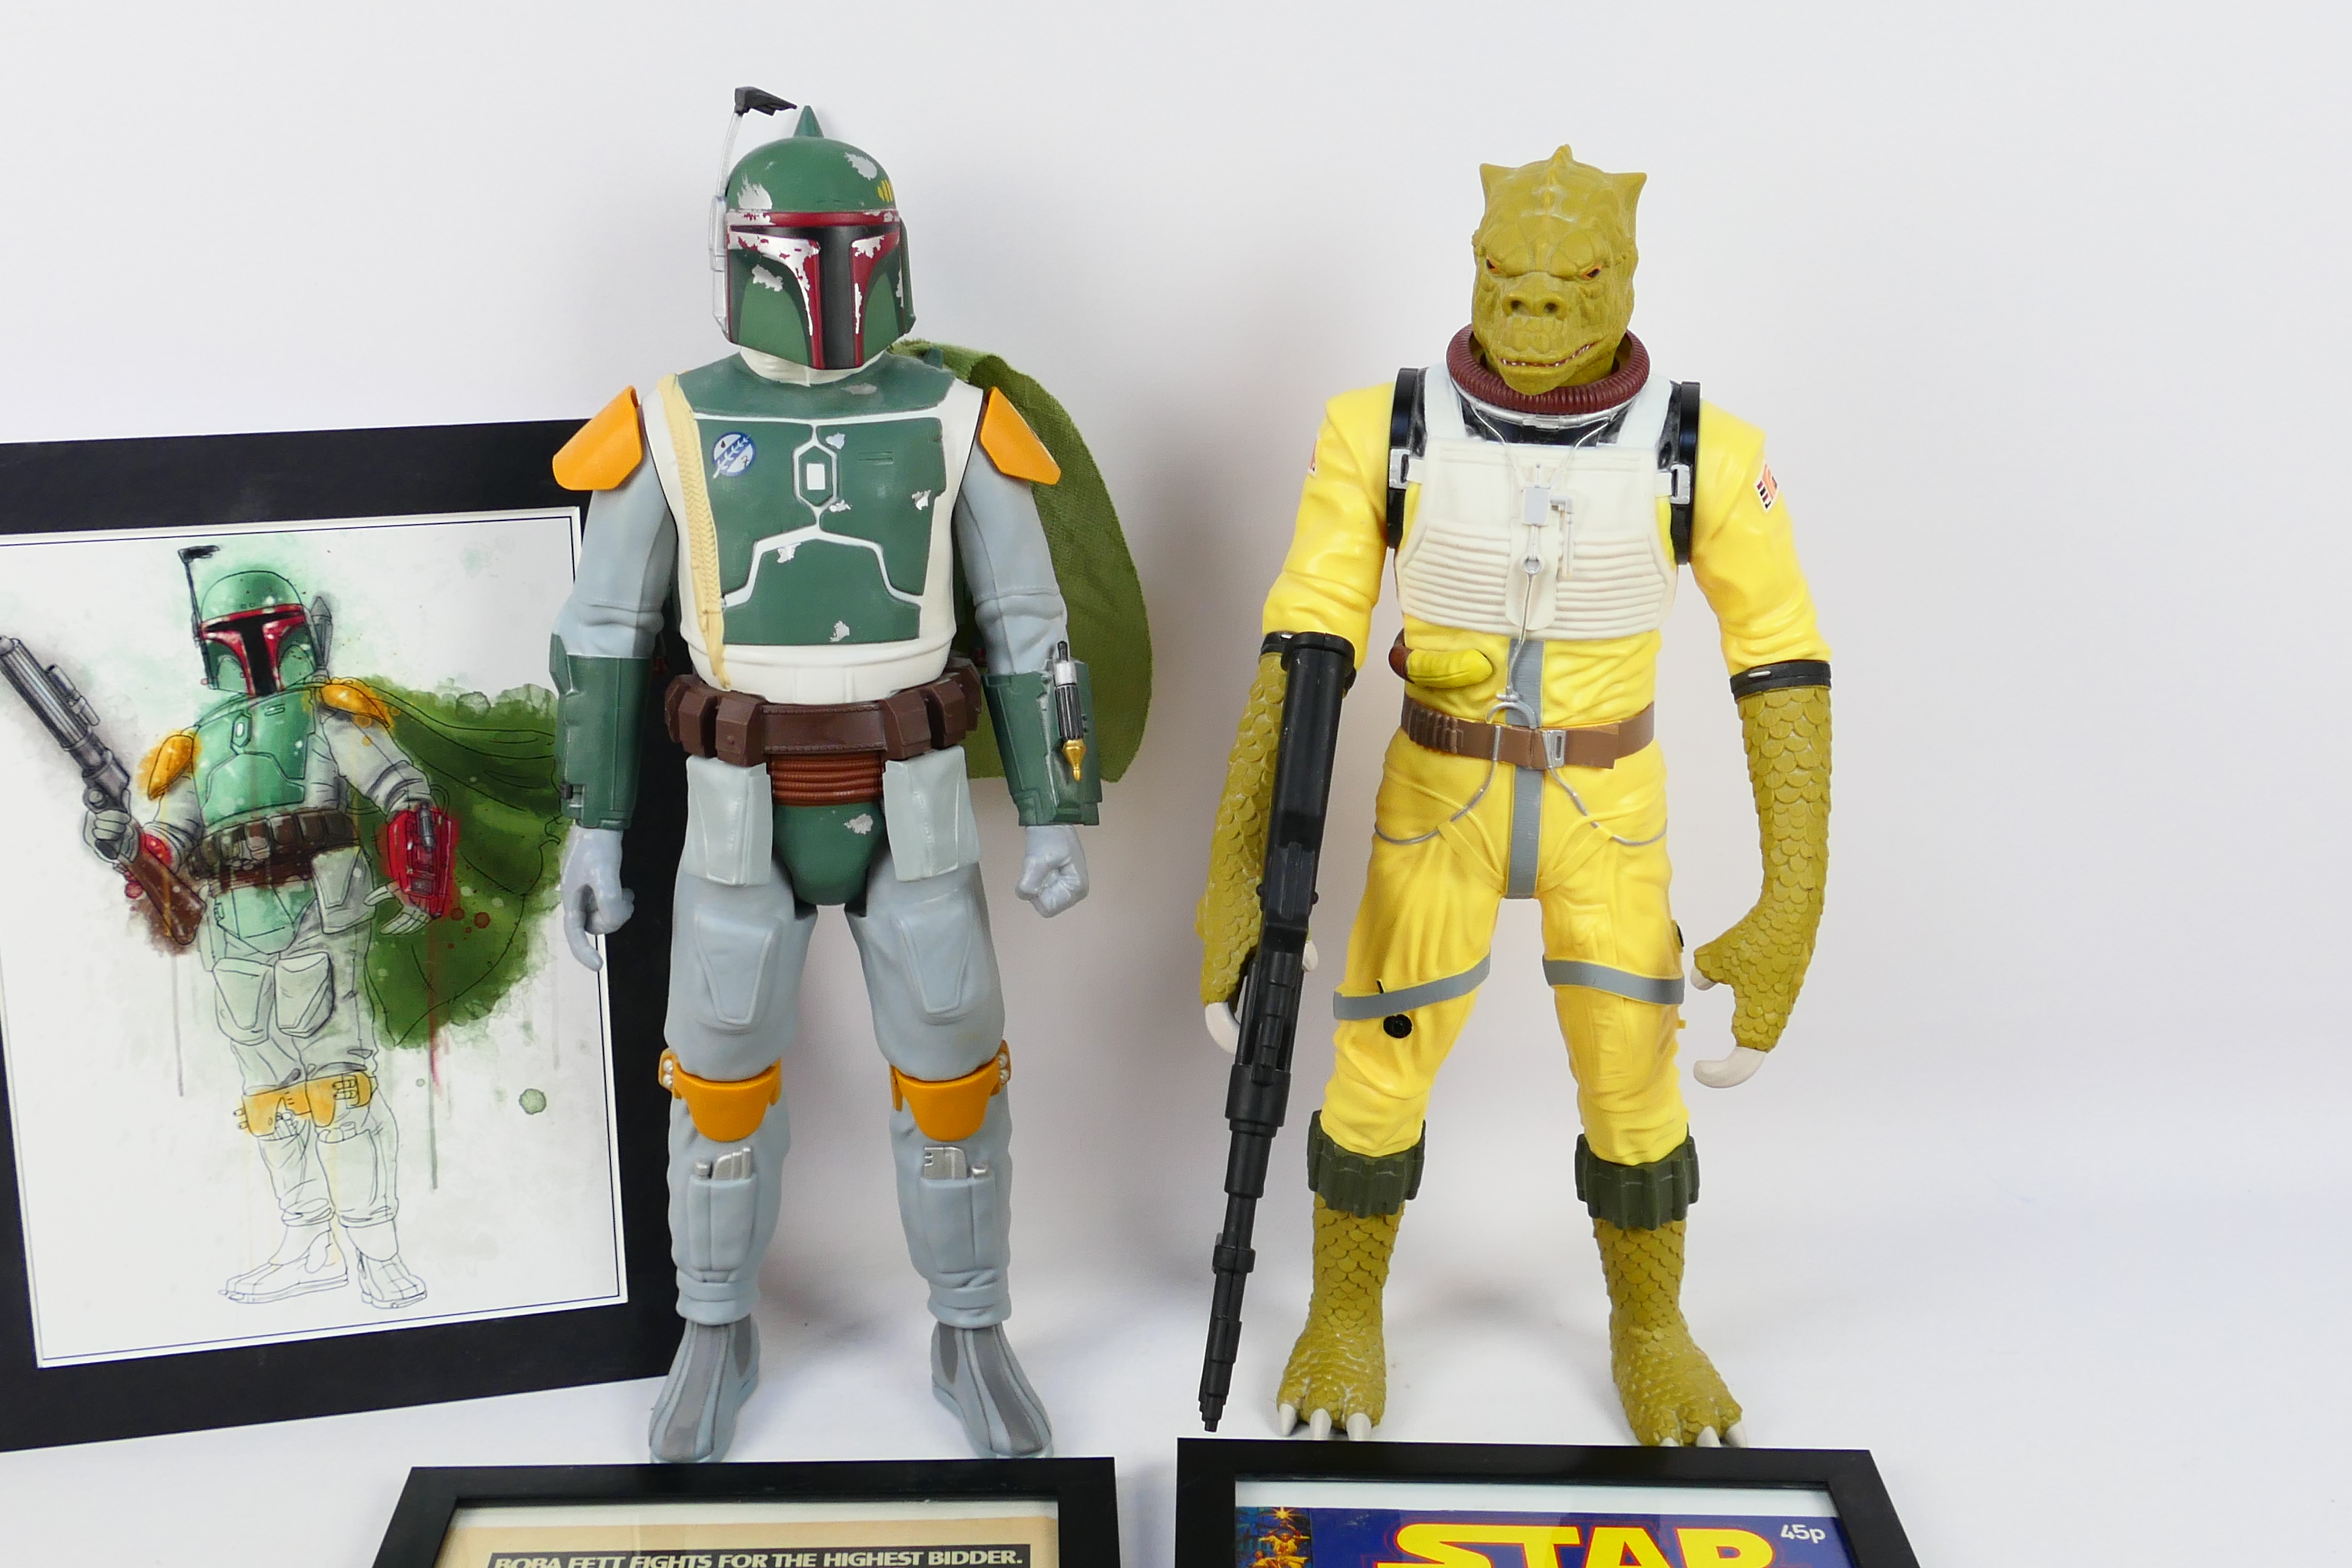 Marvel - Jakks Pacific - Star Wars - 2 x 18" figures of Bossk The Bounty Hunter with gun and Boba - Image 2 of 4